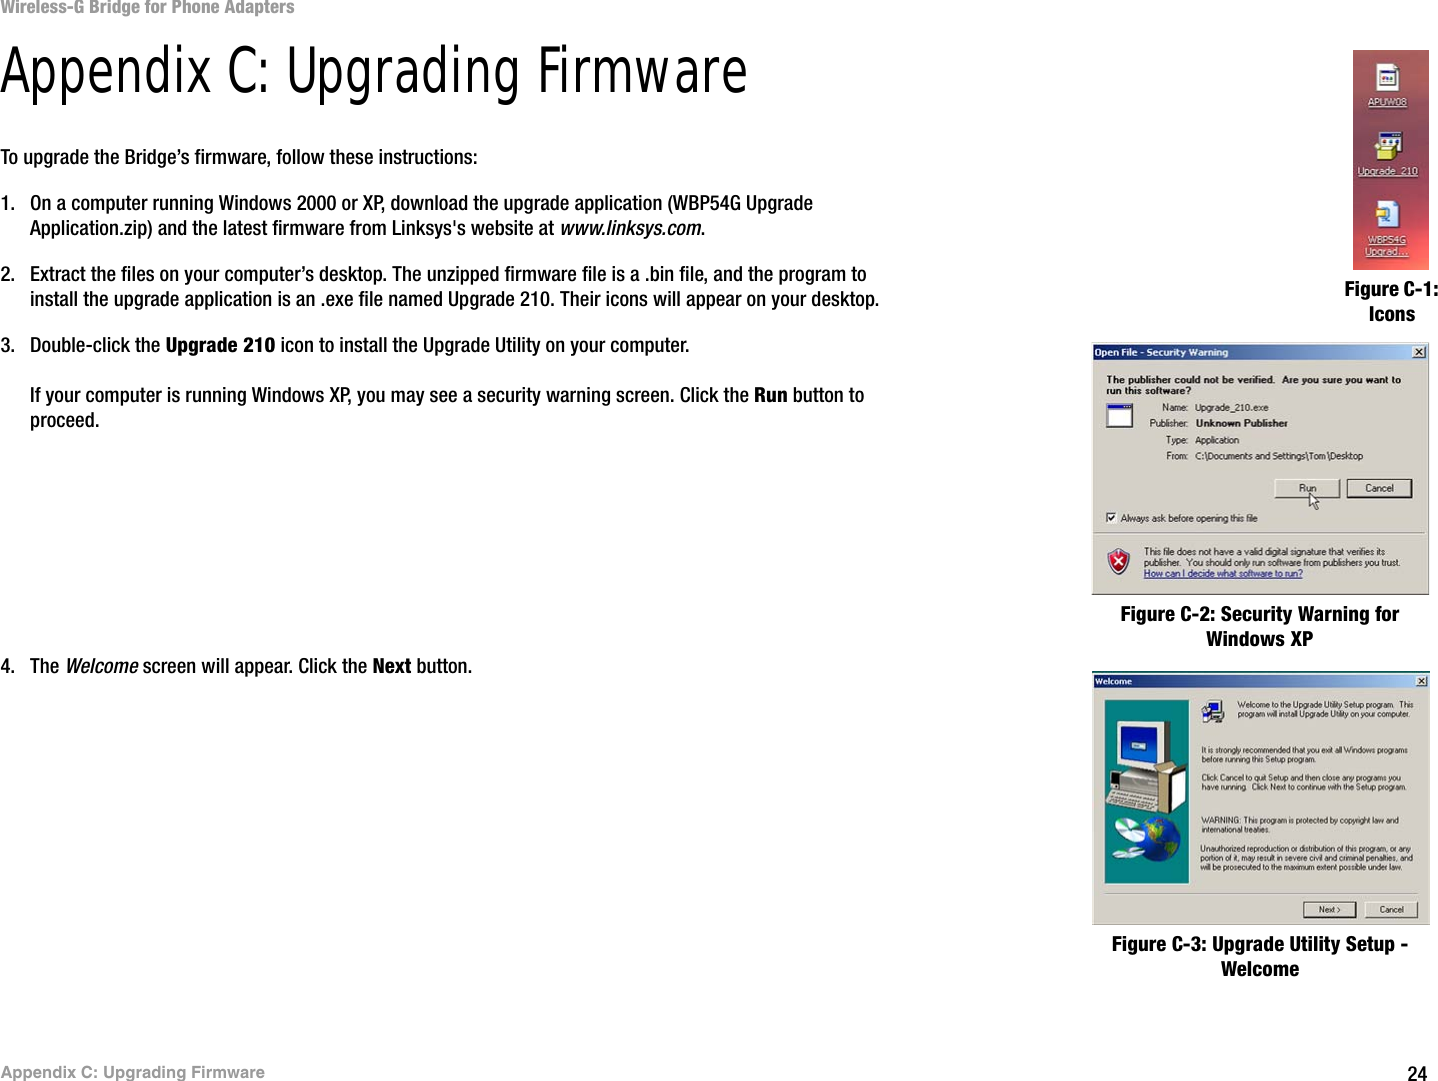 24Appendix C: Upgrading FirmwareWireless-G Bridge for Phone AdaptersAppendix C: Upgrading FirmwareTo upgrade the Bridge’s firmware, follow these instructions:1. On a computer running Windows 2000 or XP, download the upgrade application (WBP54G Upgrade Application.zip) and the latest firmware from Linksys&apos;s website at www.linksys.com.2. Extract the files on your computer’s desktop. The unzipped firmware file is a .bin file, and the program to install the upgrade application is an .exe file named Upgrade 210. Their icons will appear on your desktop.3. Double-click the Upgrade 210 icon to install the Upgrade Utility on your computer.If your computer is running Windows XP, you may see a security warning screen. Click the Run button to proceed.4. The Welcome screen will appear. Click the Next button.Figure C-1: IconsFigure C-2: Security Warning for Windows XPFigure C-3: Upgrade Utility Setup - Welcome